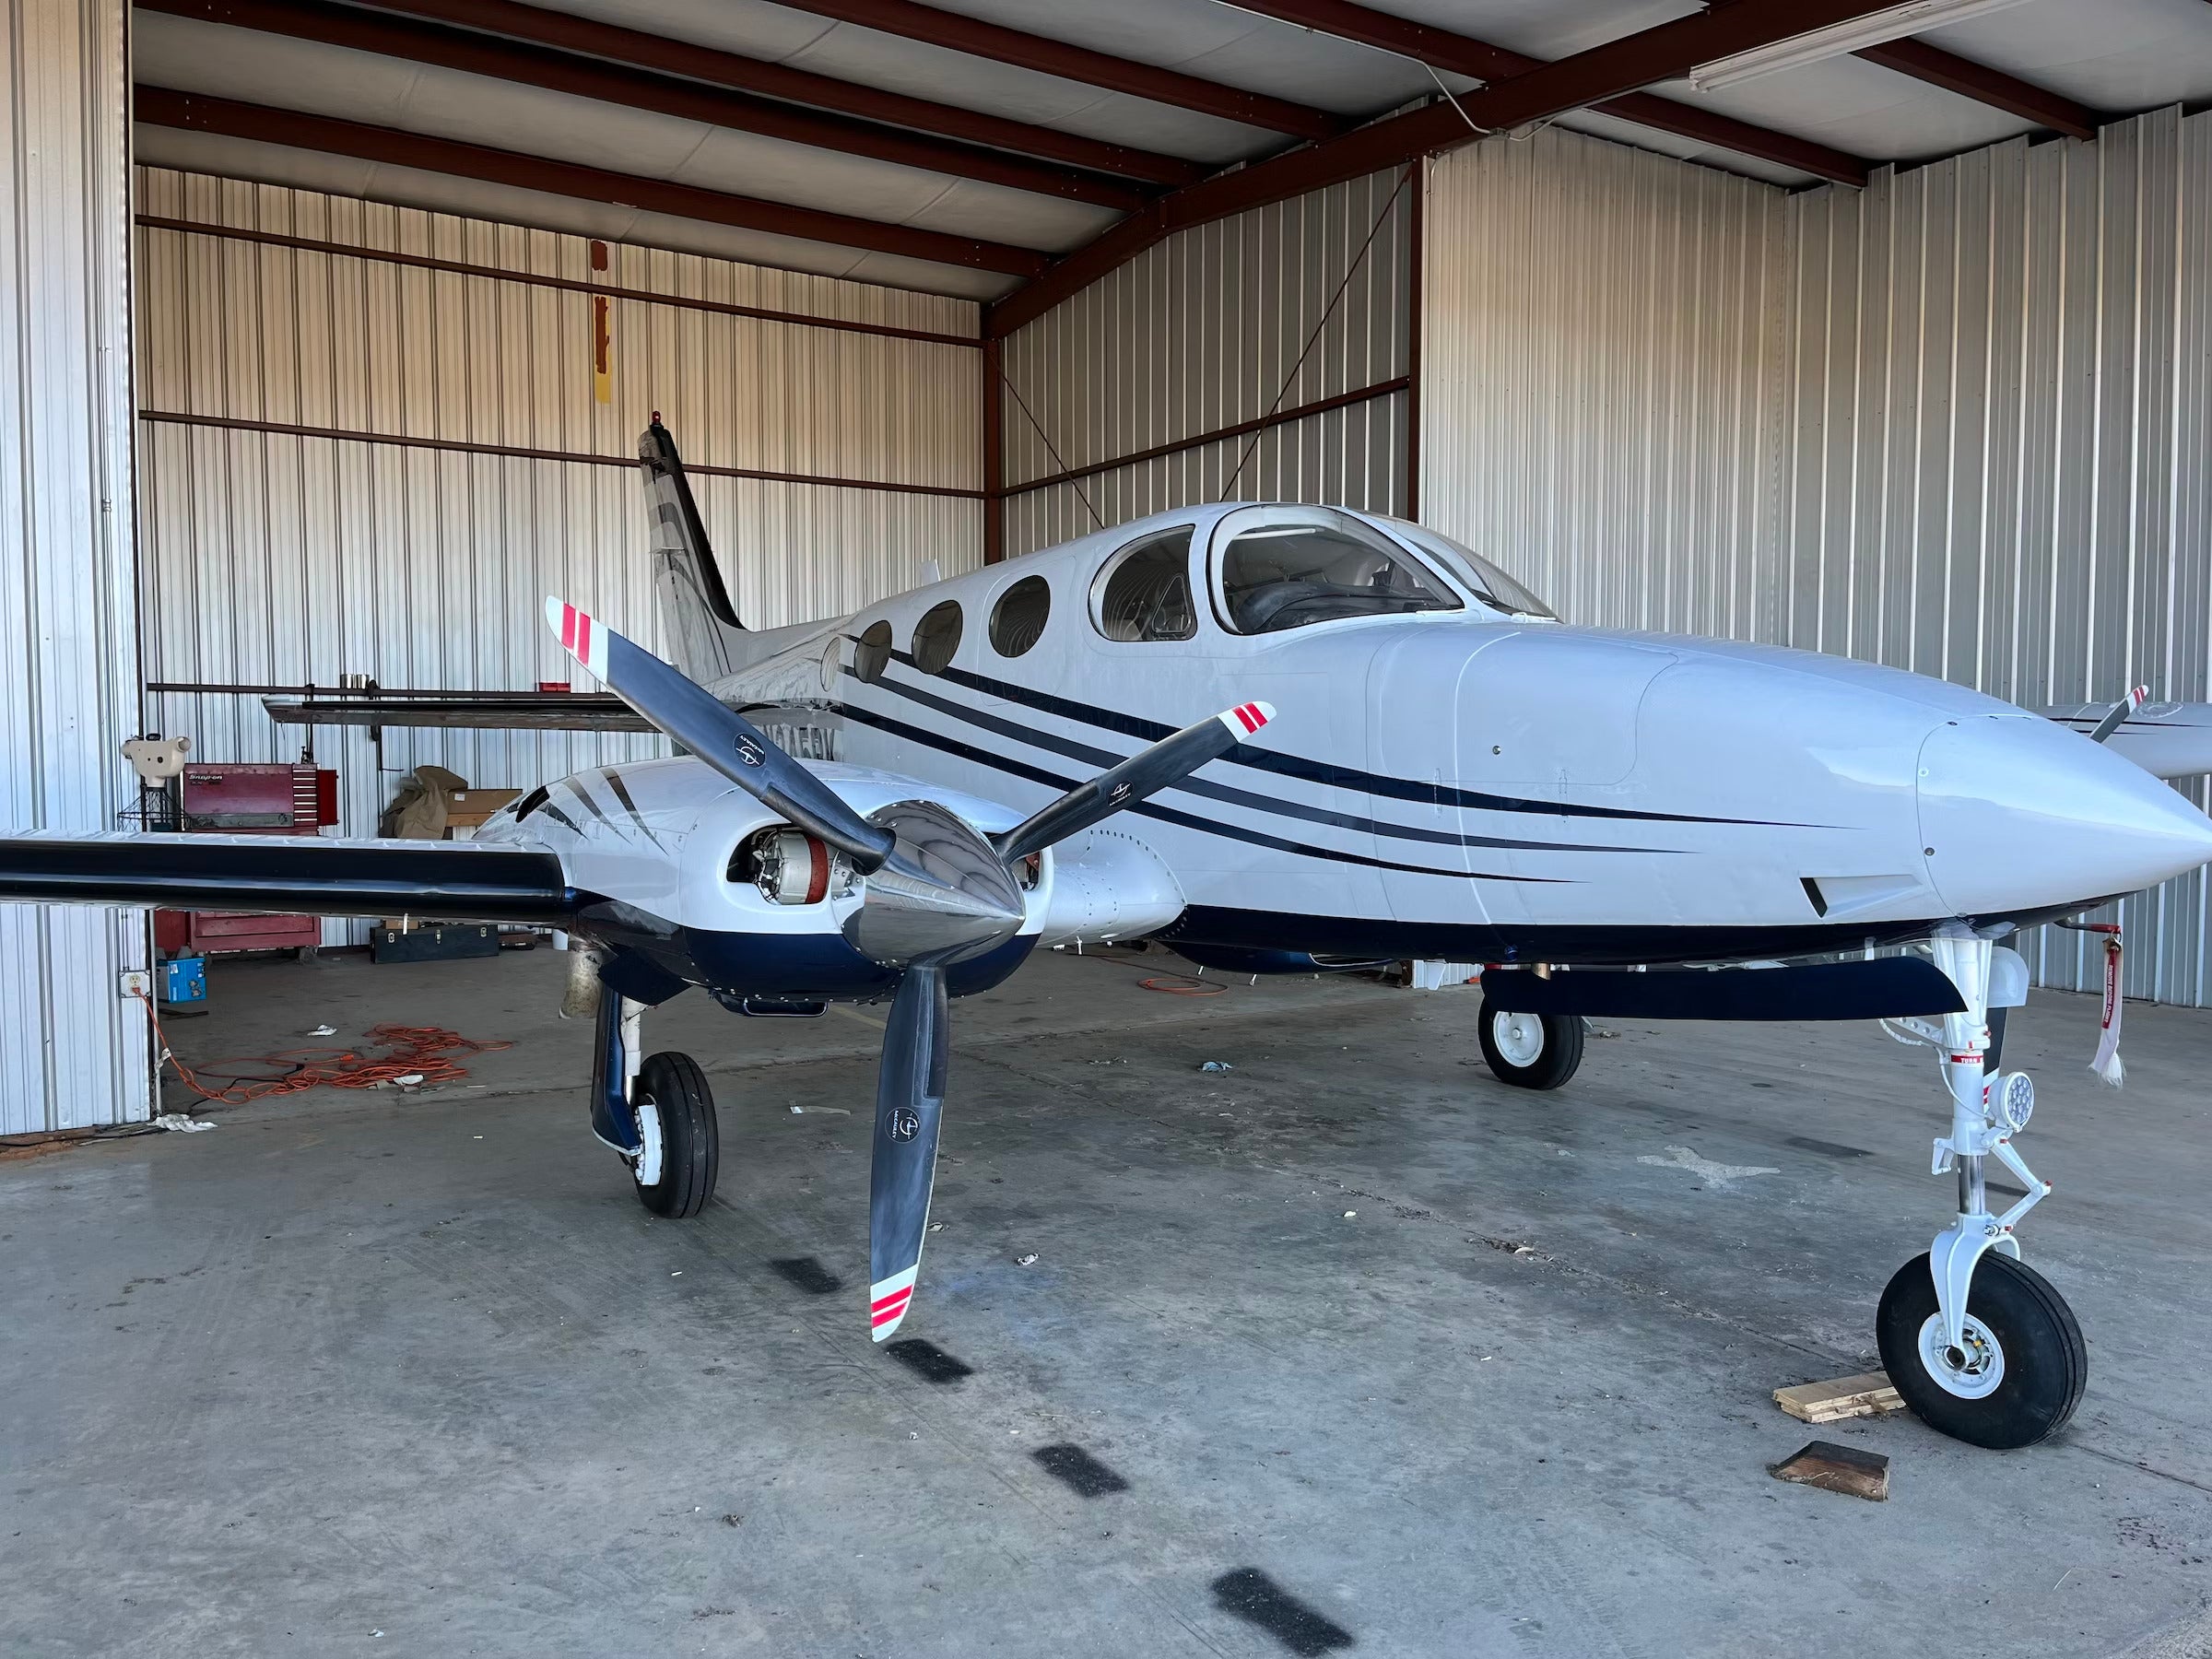 This 1976 Cessna 340A Is a Cabin-Class, Load-Carrying ‘AircraftForSale’ Top Pick